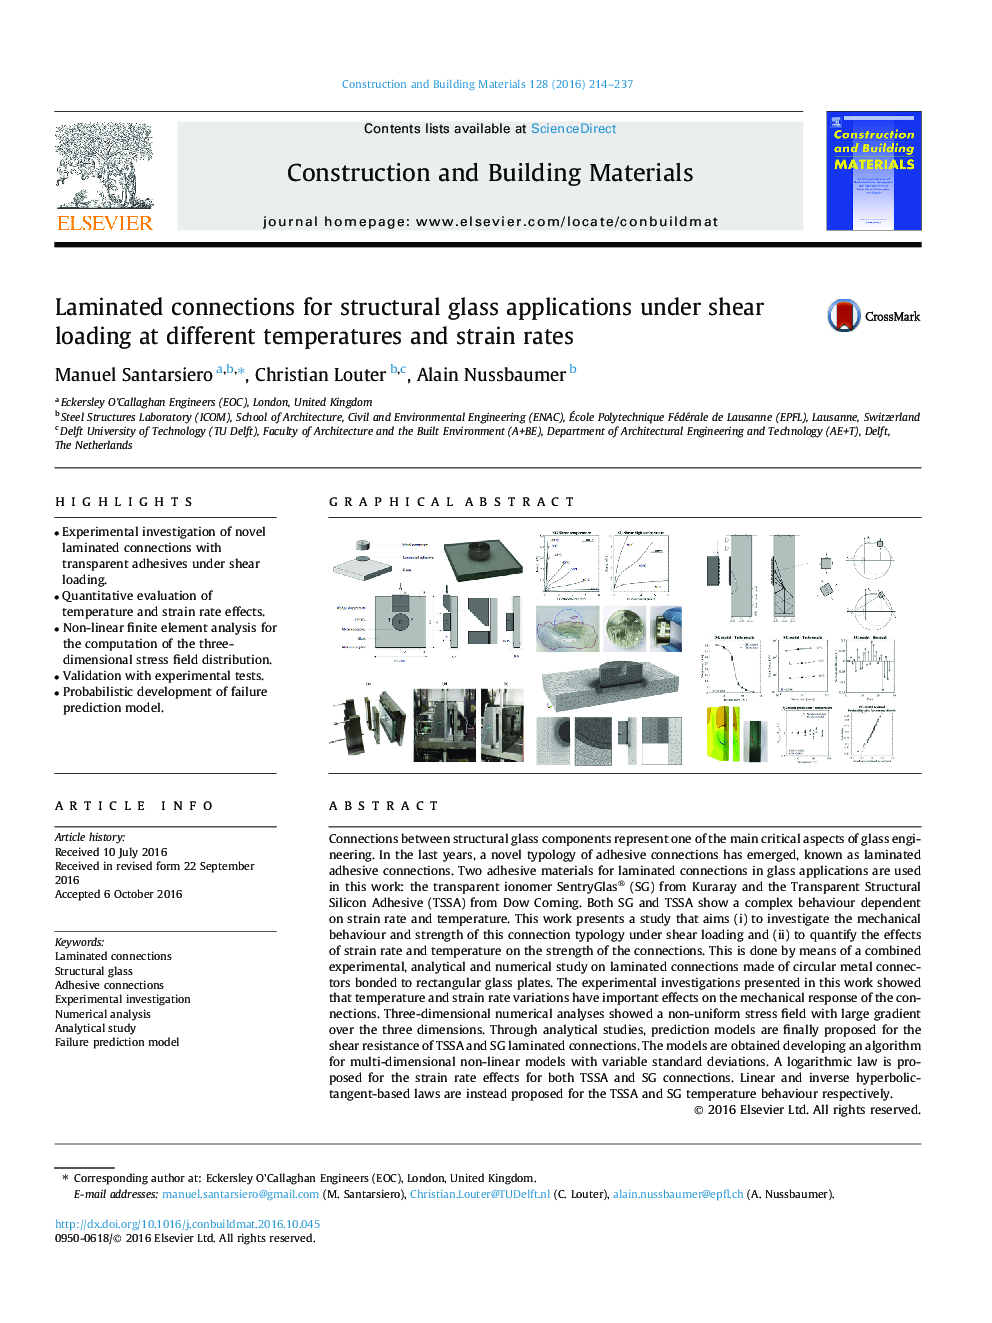 Laminated connections for structural glass applications under shear loading at different temperatures and strain rates